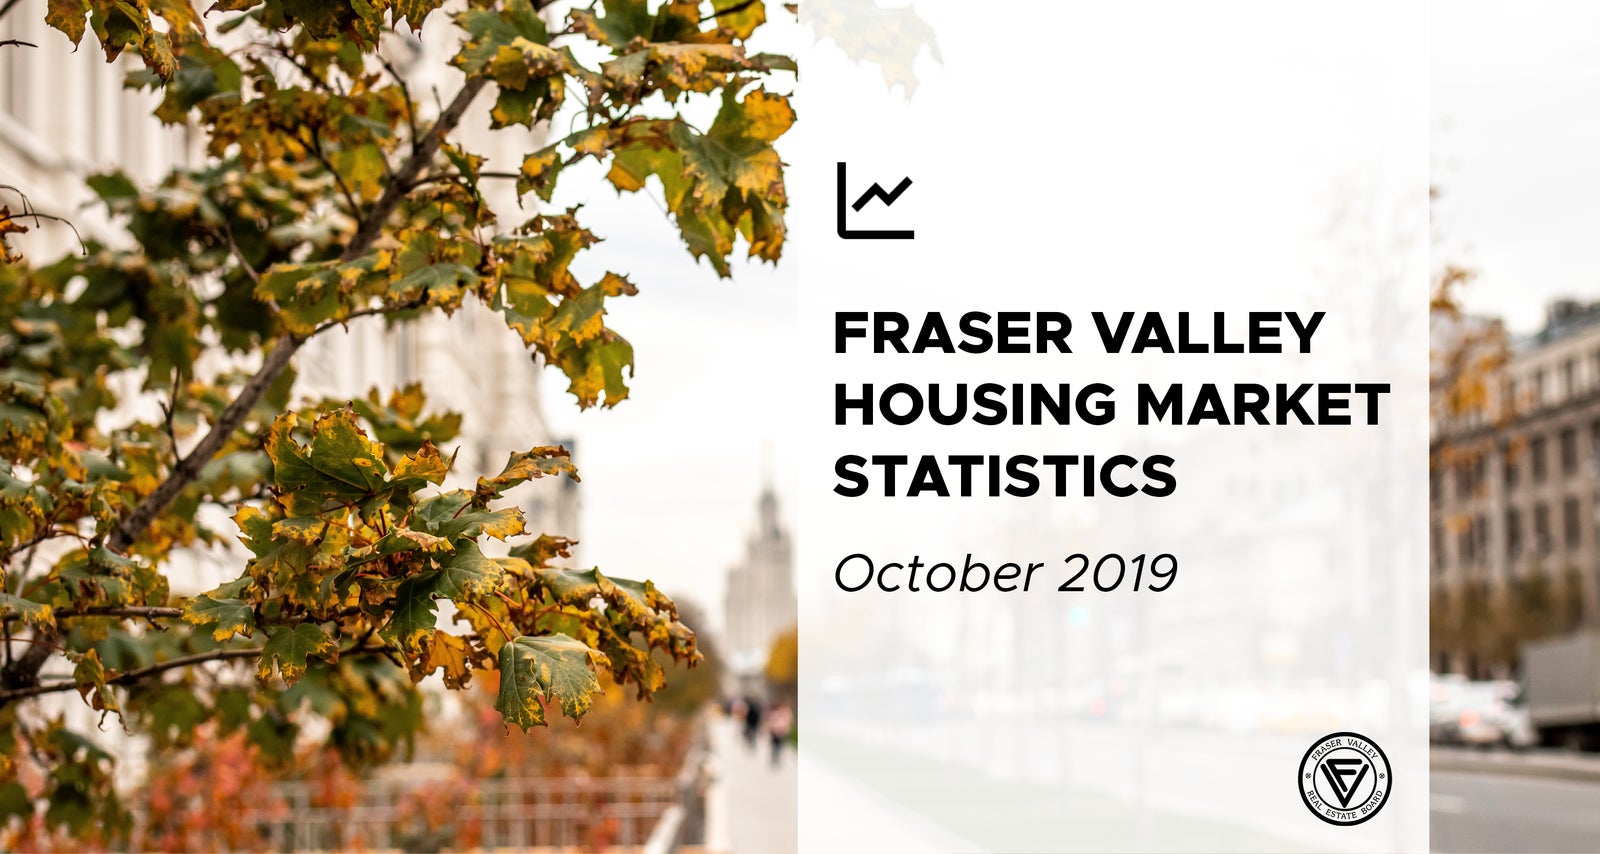 Real estate rebound continues for Fraser Valley